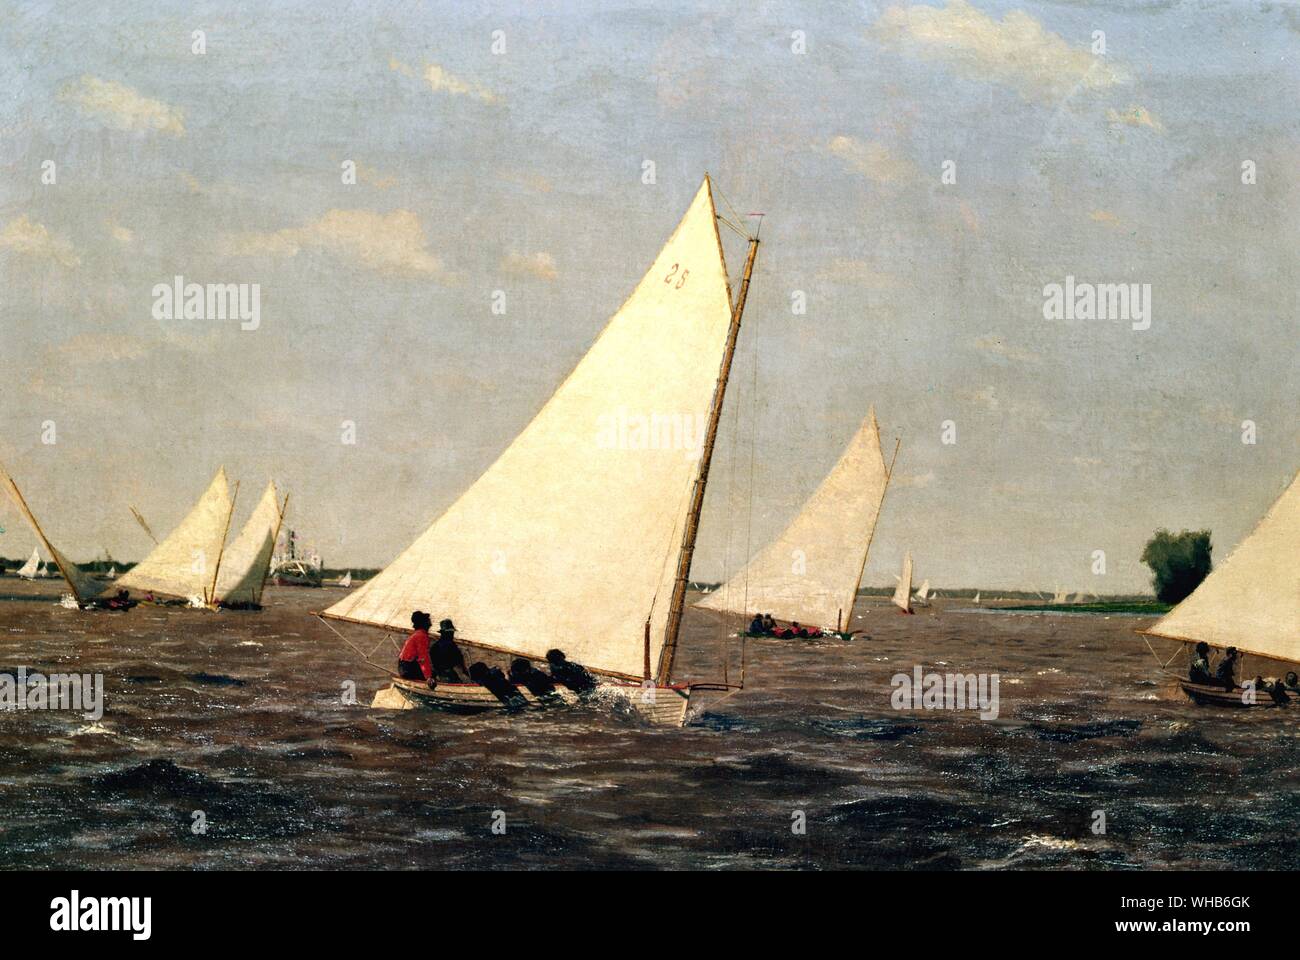 Catboats sailing on the Delaware, 1874 - painting by Thomas Eakins.. Thomas Cowperthwait Eakins (July 25, 1844 - June 25, 1916) was a painter, photographer, sculptor, and fine arts educator. He was one of the greatest American painters of his time, an innovating teacher, and an uncompromising realist. He was also the most neglected major painter of his era in the United States.. Stock Photo